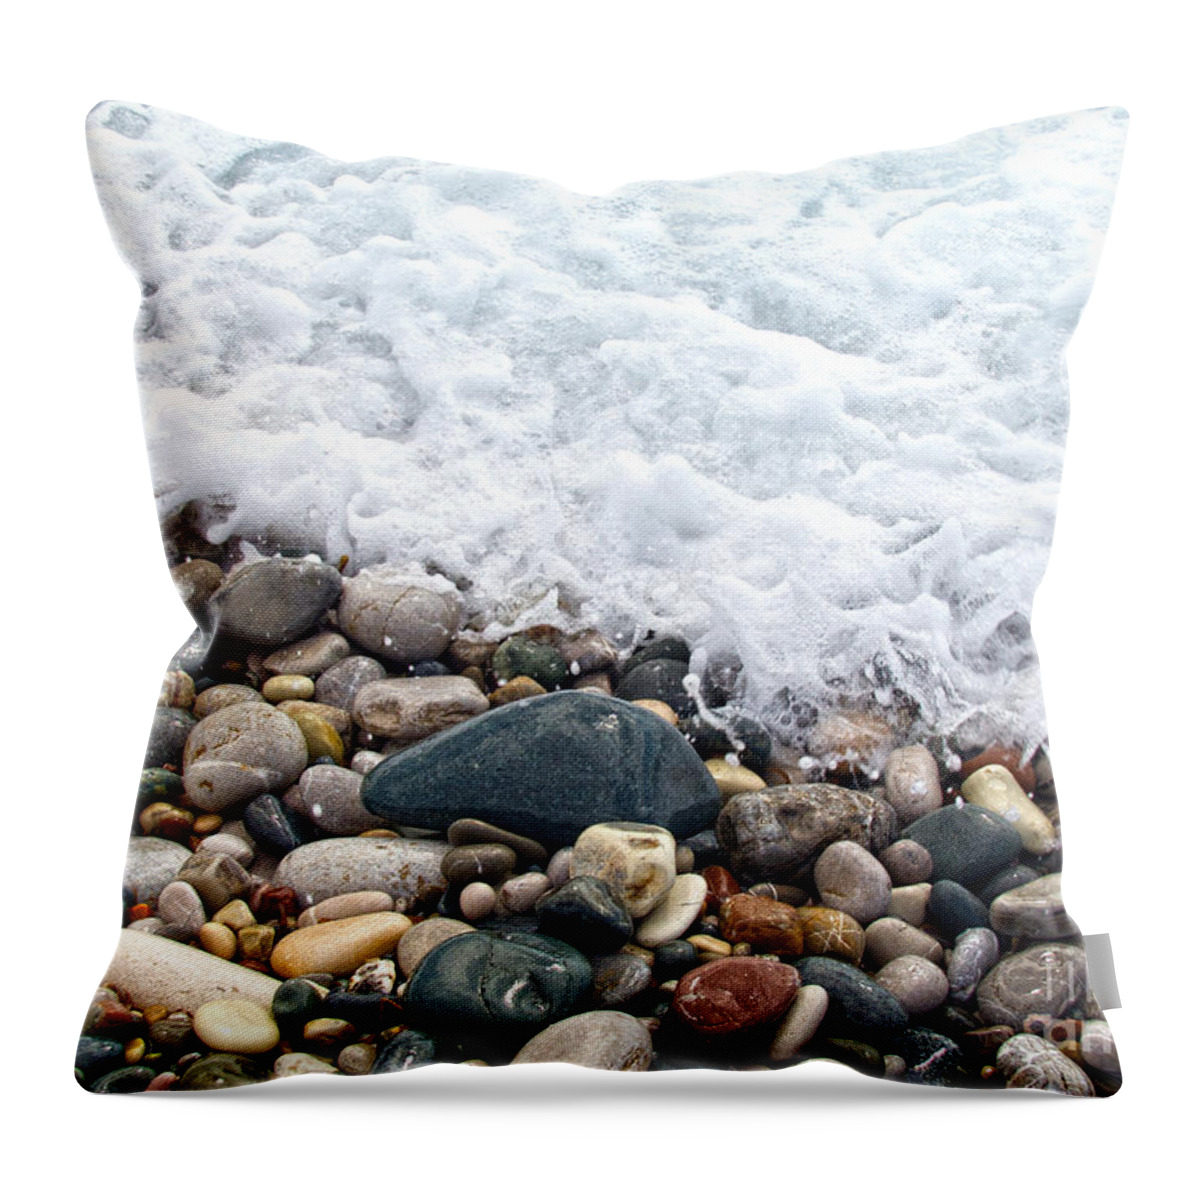 Ocean Stones Throw Pillow featuring the photograph Ocean Stones #3 by Stelios Kleanthous